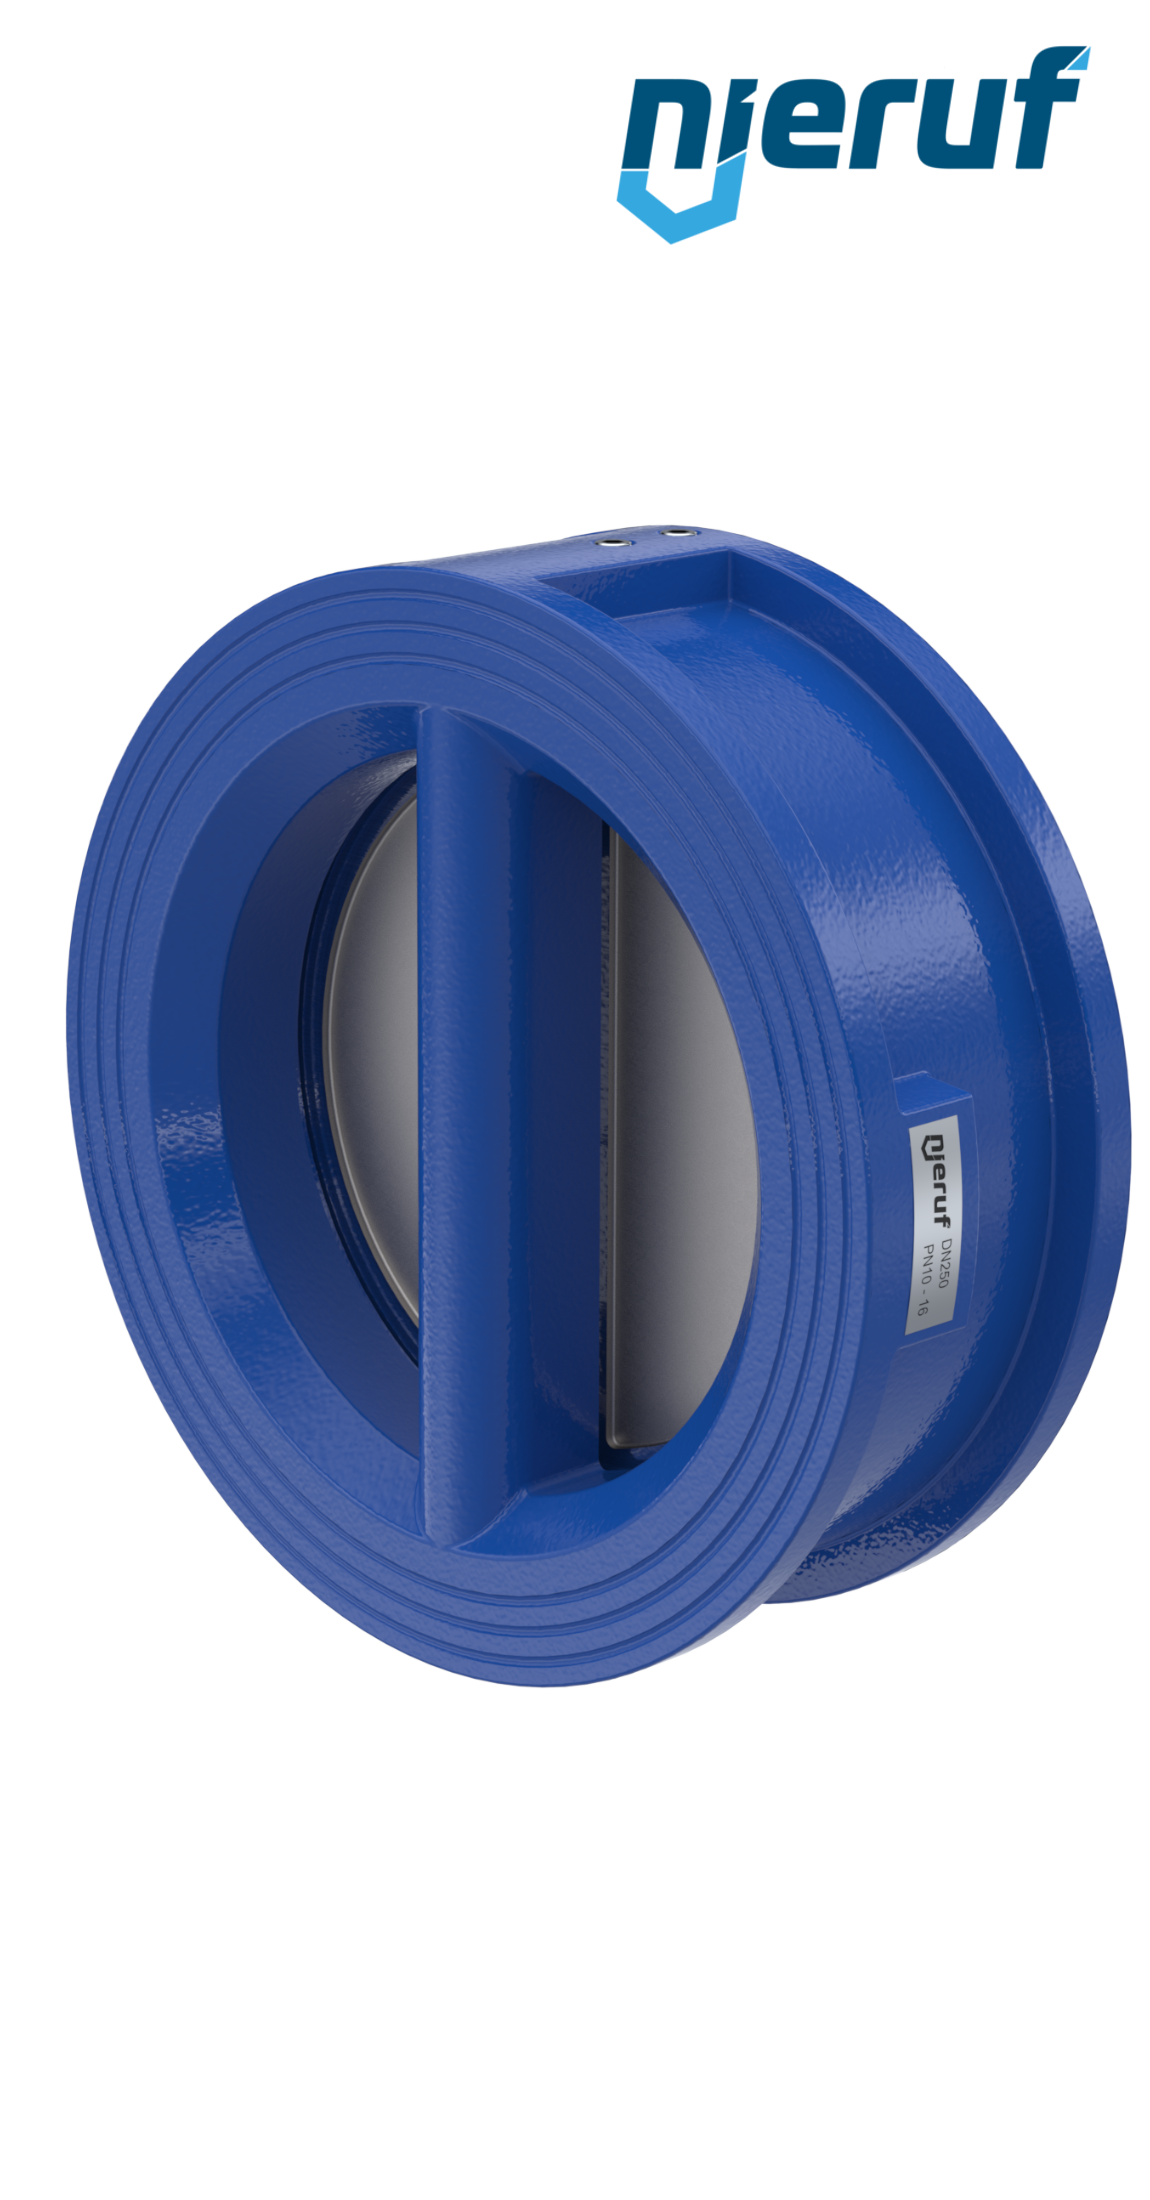 dual plate check valve DN250 DR02 GGG40 epoxyd plated blue 180µm EPDM